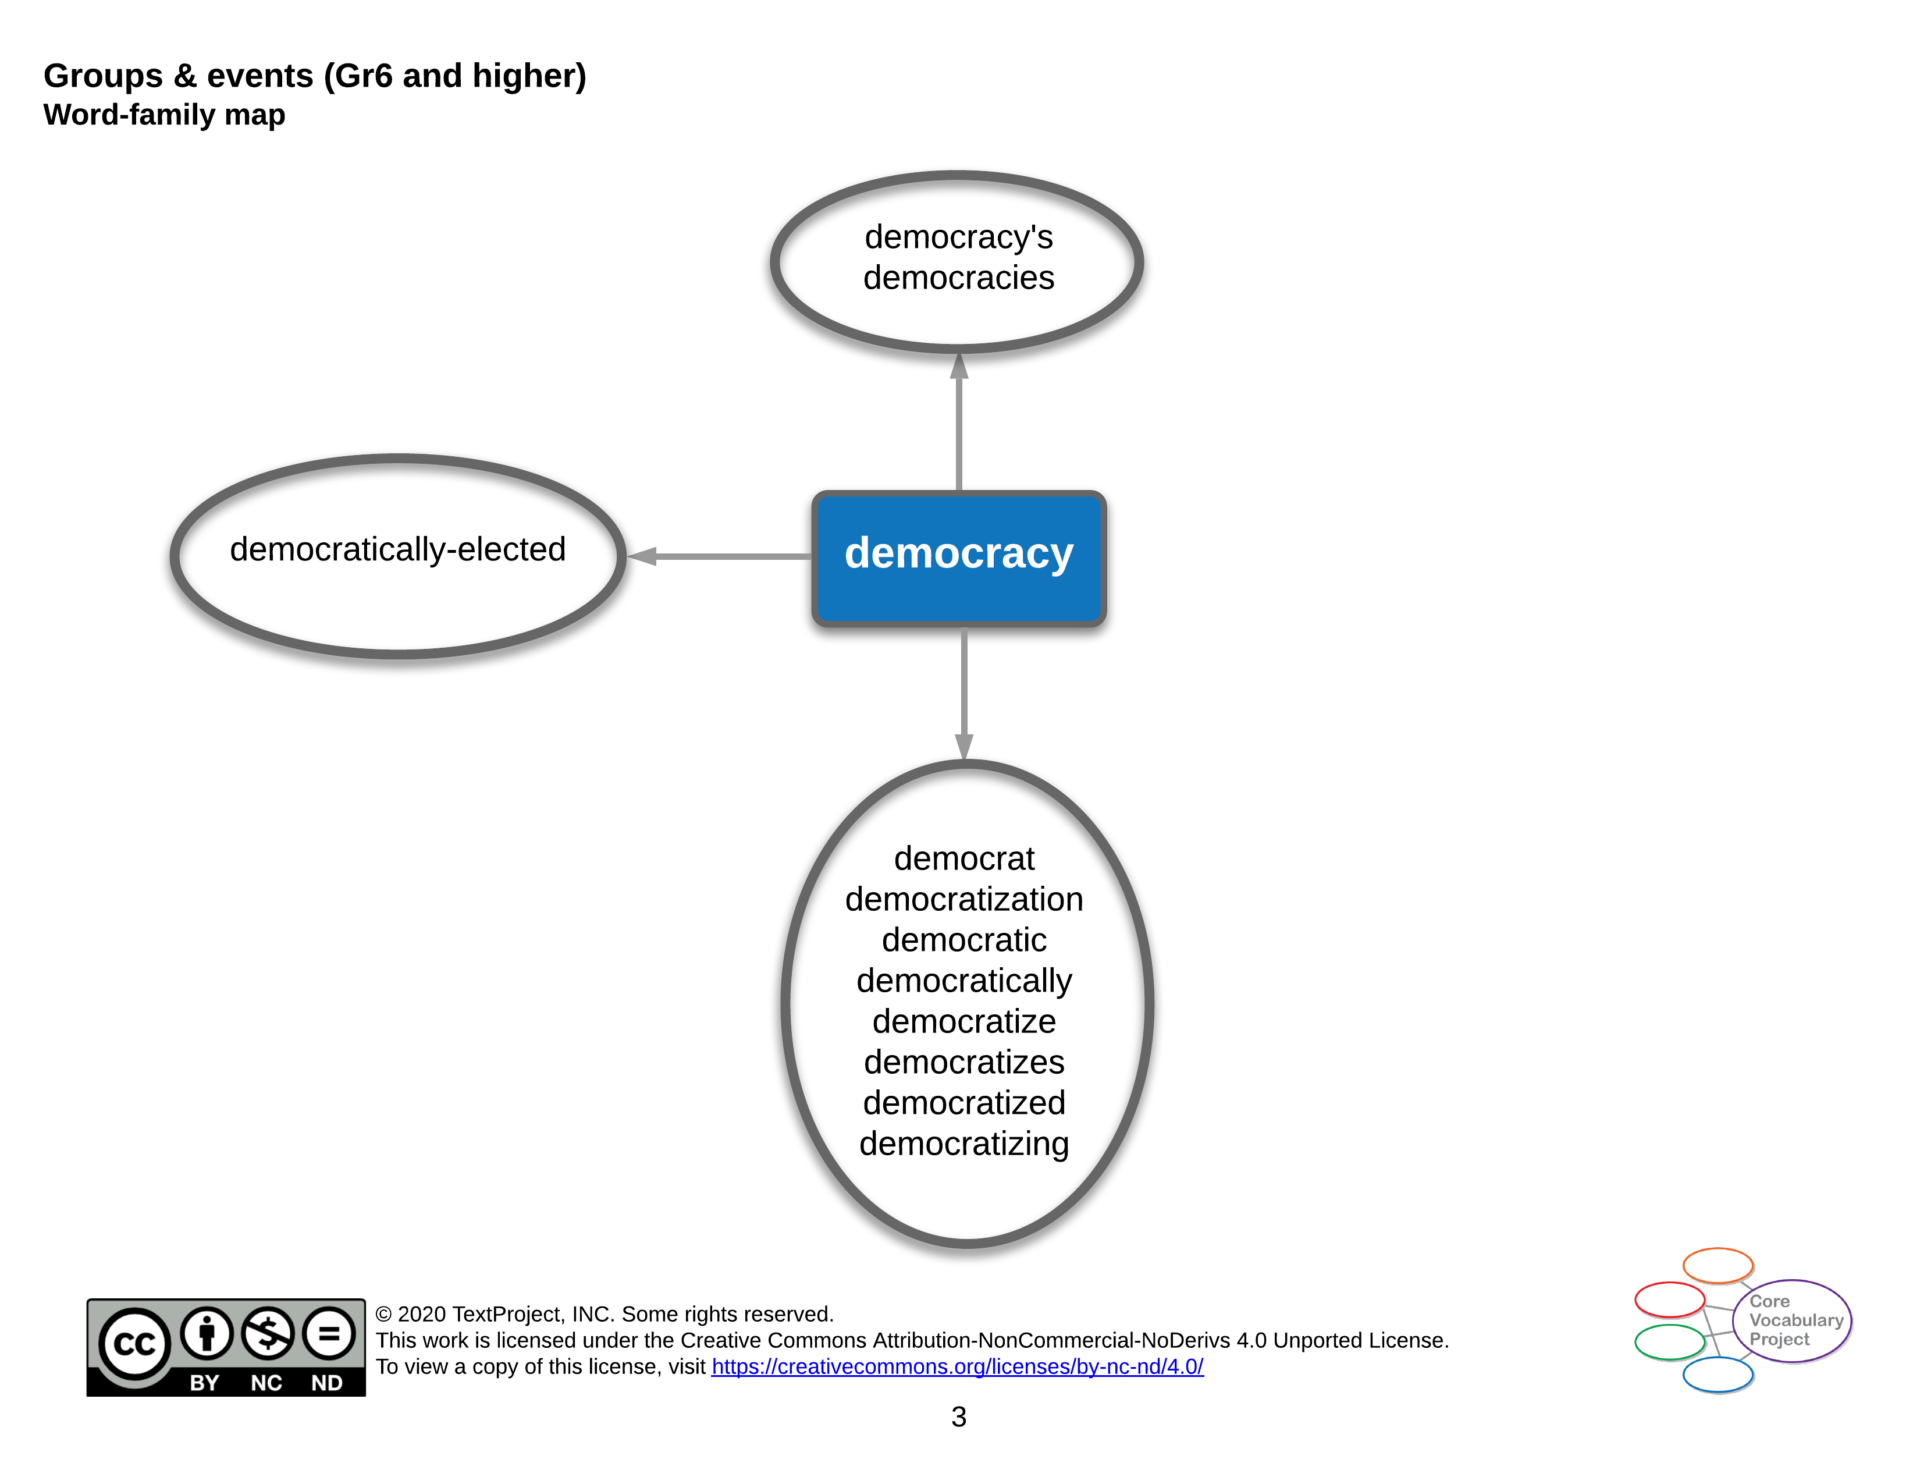 Groups-and-events-CVP-GR6-higher-democracy.png